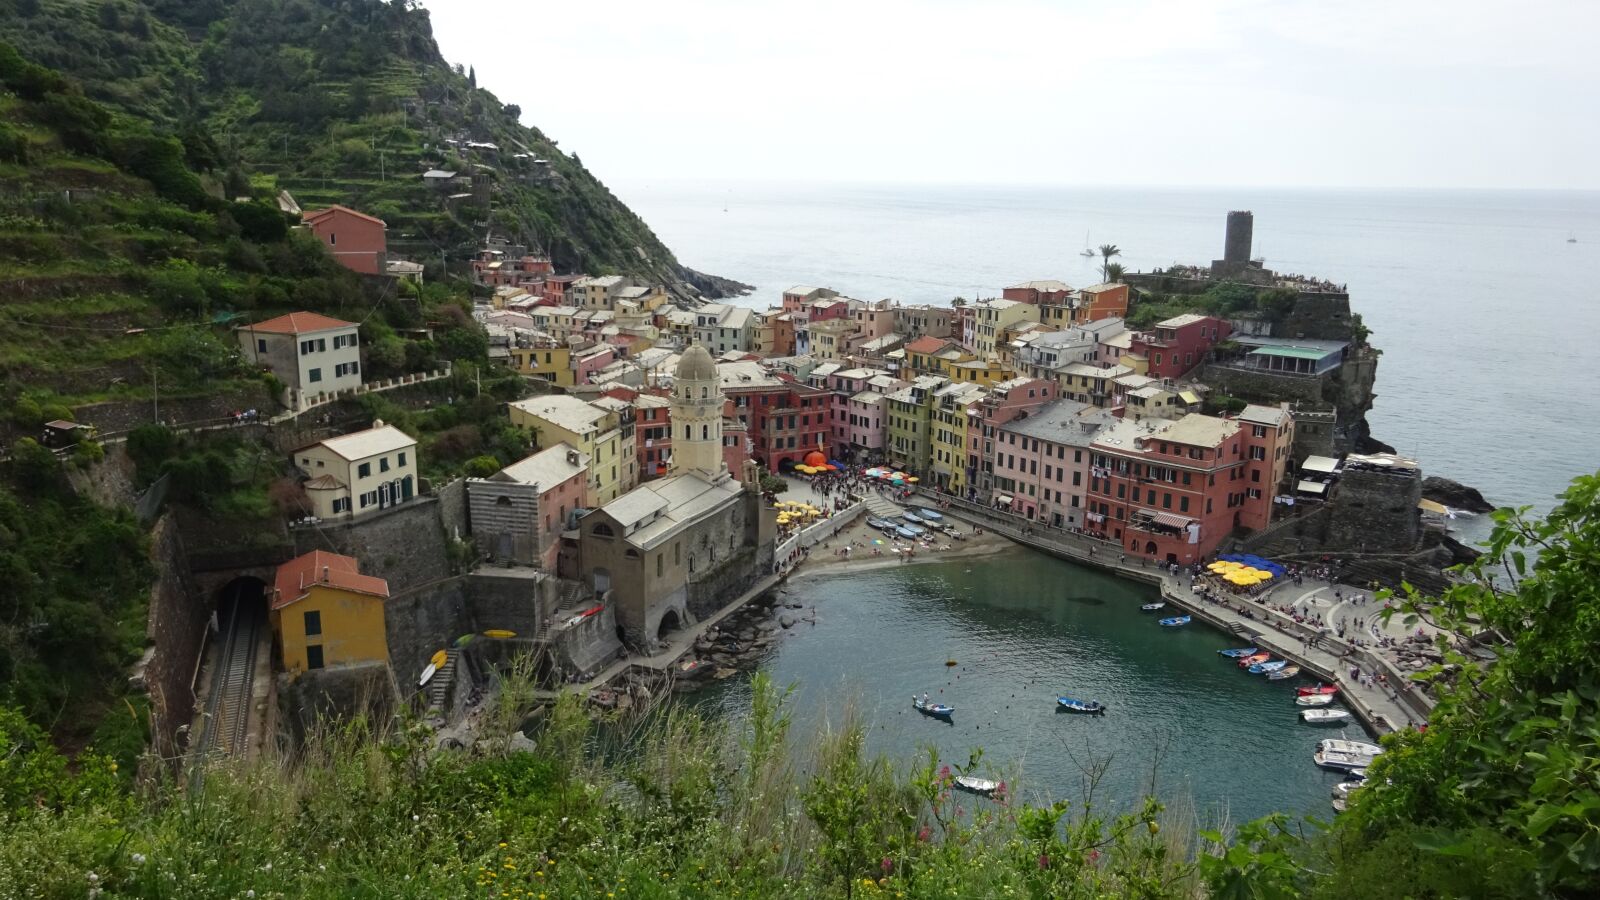 Sony Cyber-shot DSC-WX350 sample photo. Cinque terre, italy, sea photography